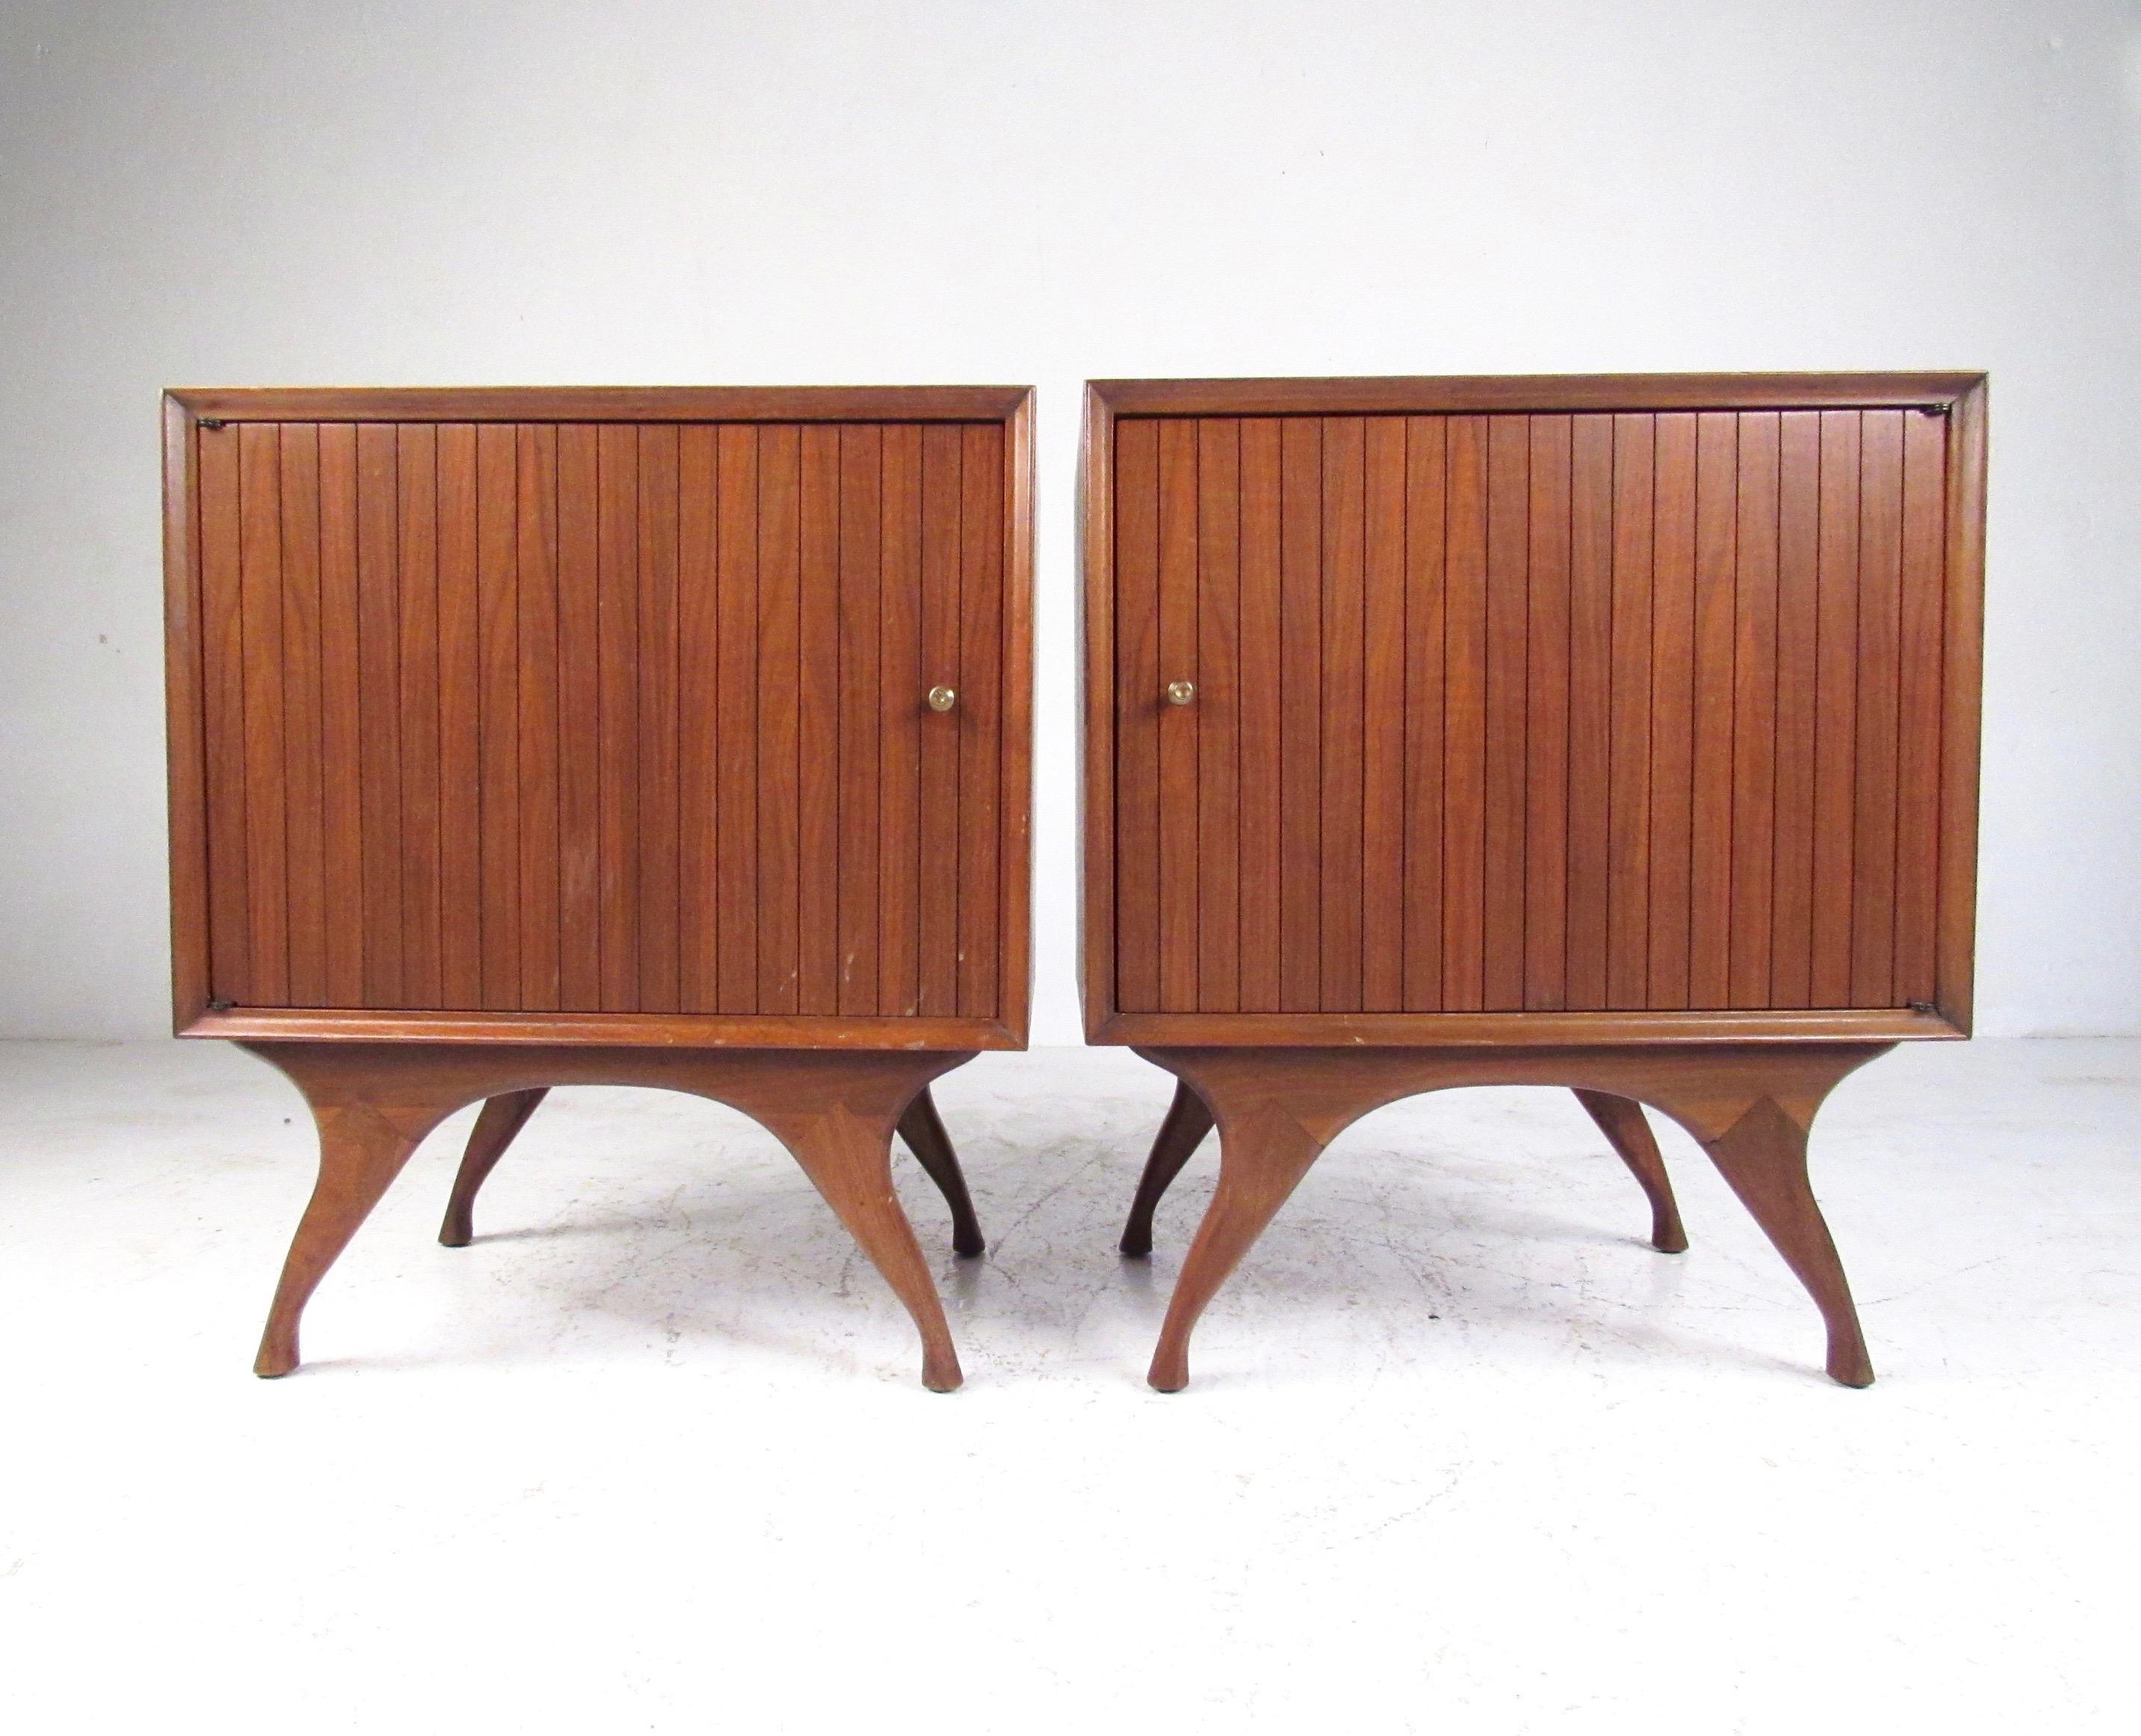 The shapely design of this matched pair of vintage walnut nightstands features sculpted legs, slatted cabinet doors, and adjustable shelf storage. Perfect set of Mid-Century Modern bedside tables offer storage and style, please confirm item location